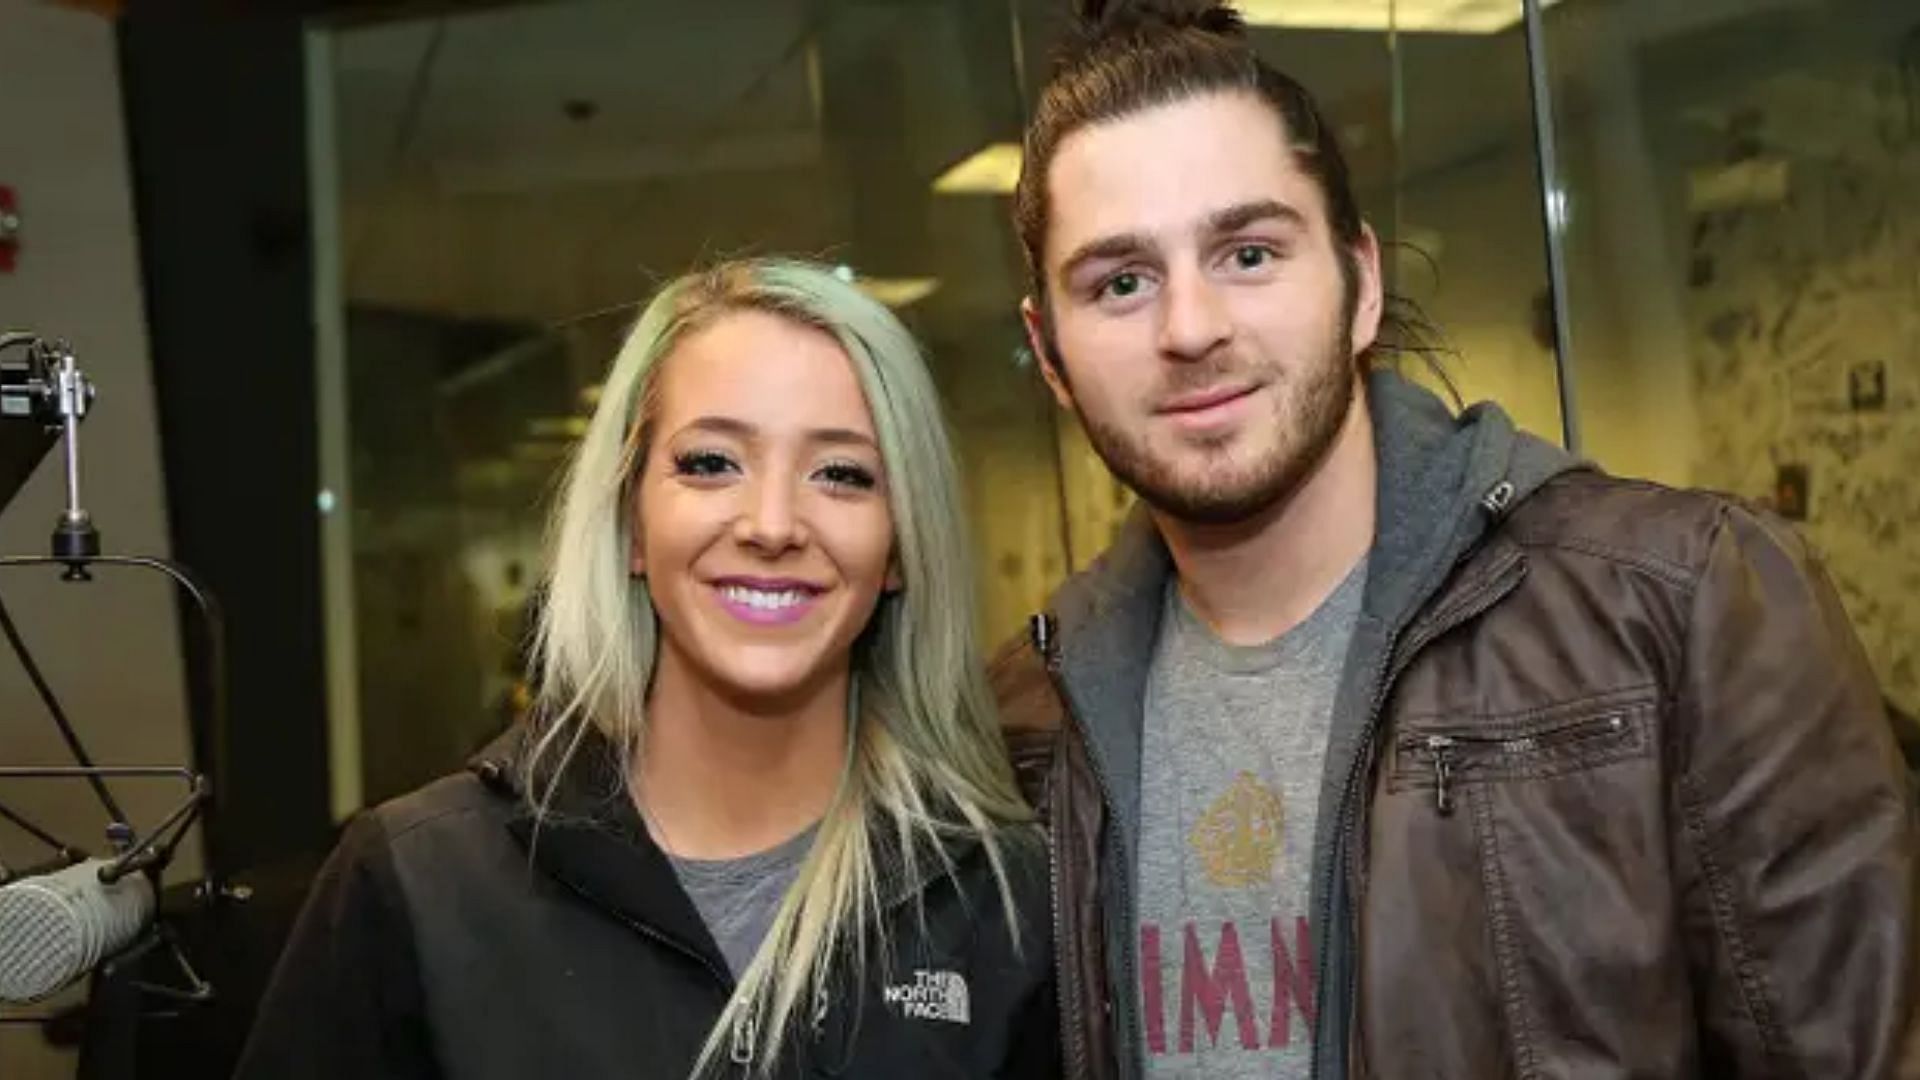 Jenna Marbles and Julian Solomita started dating in 2013 (Image by Monica Schipper/Getty Images)